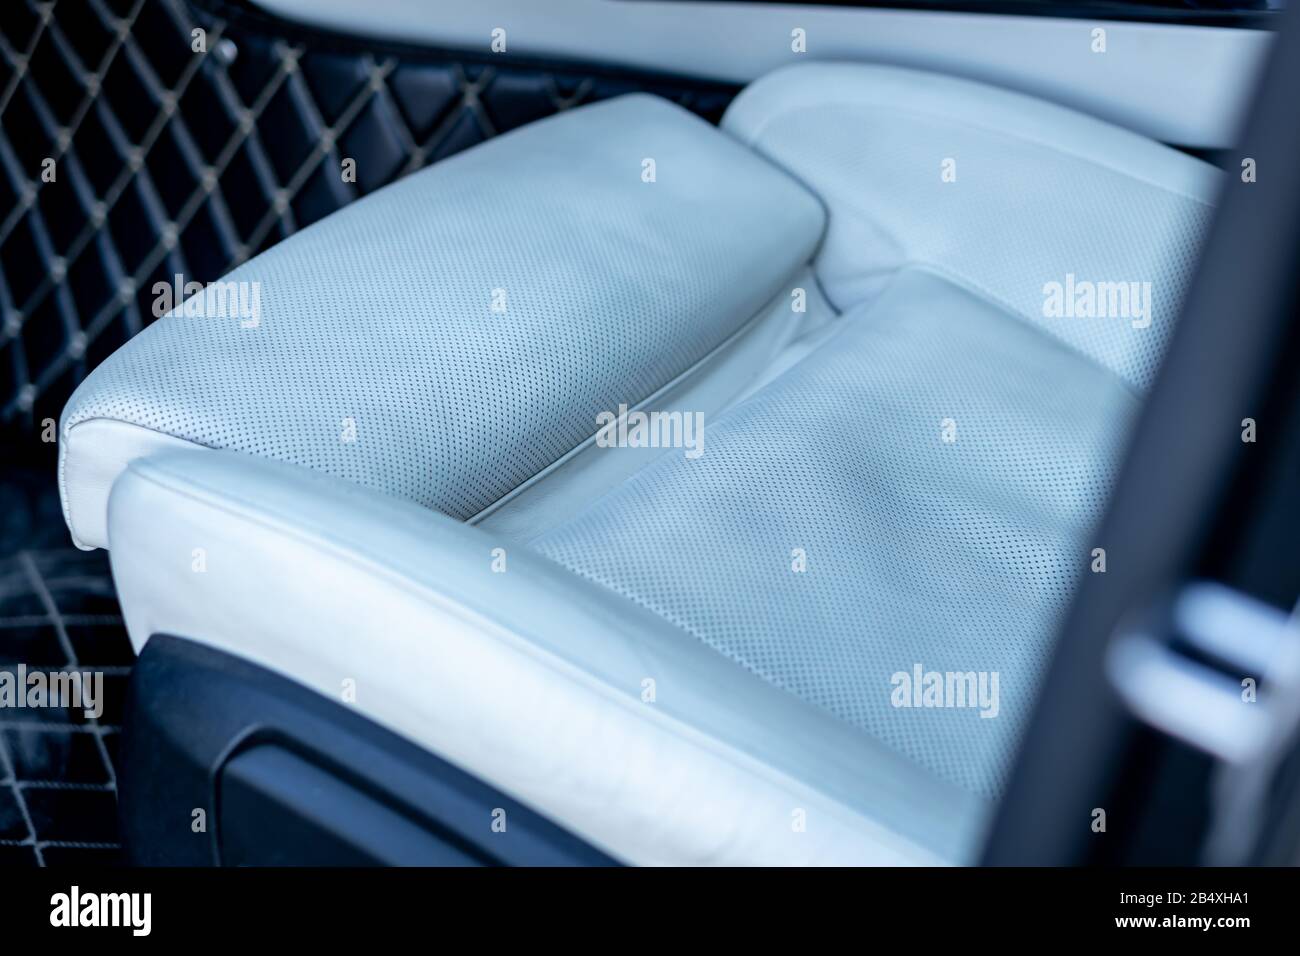 Beautiful german car luxurious interior with white leather, black trim ornaments, heated and ventilated seats, harman kardon sound system, individual Stock Photo